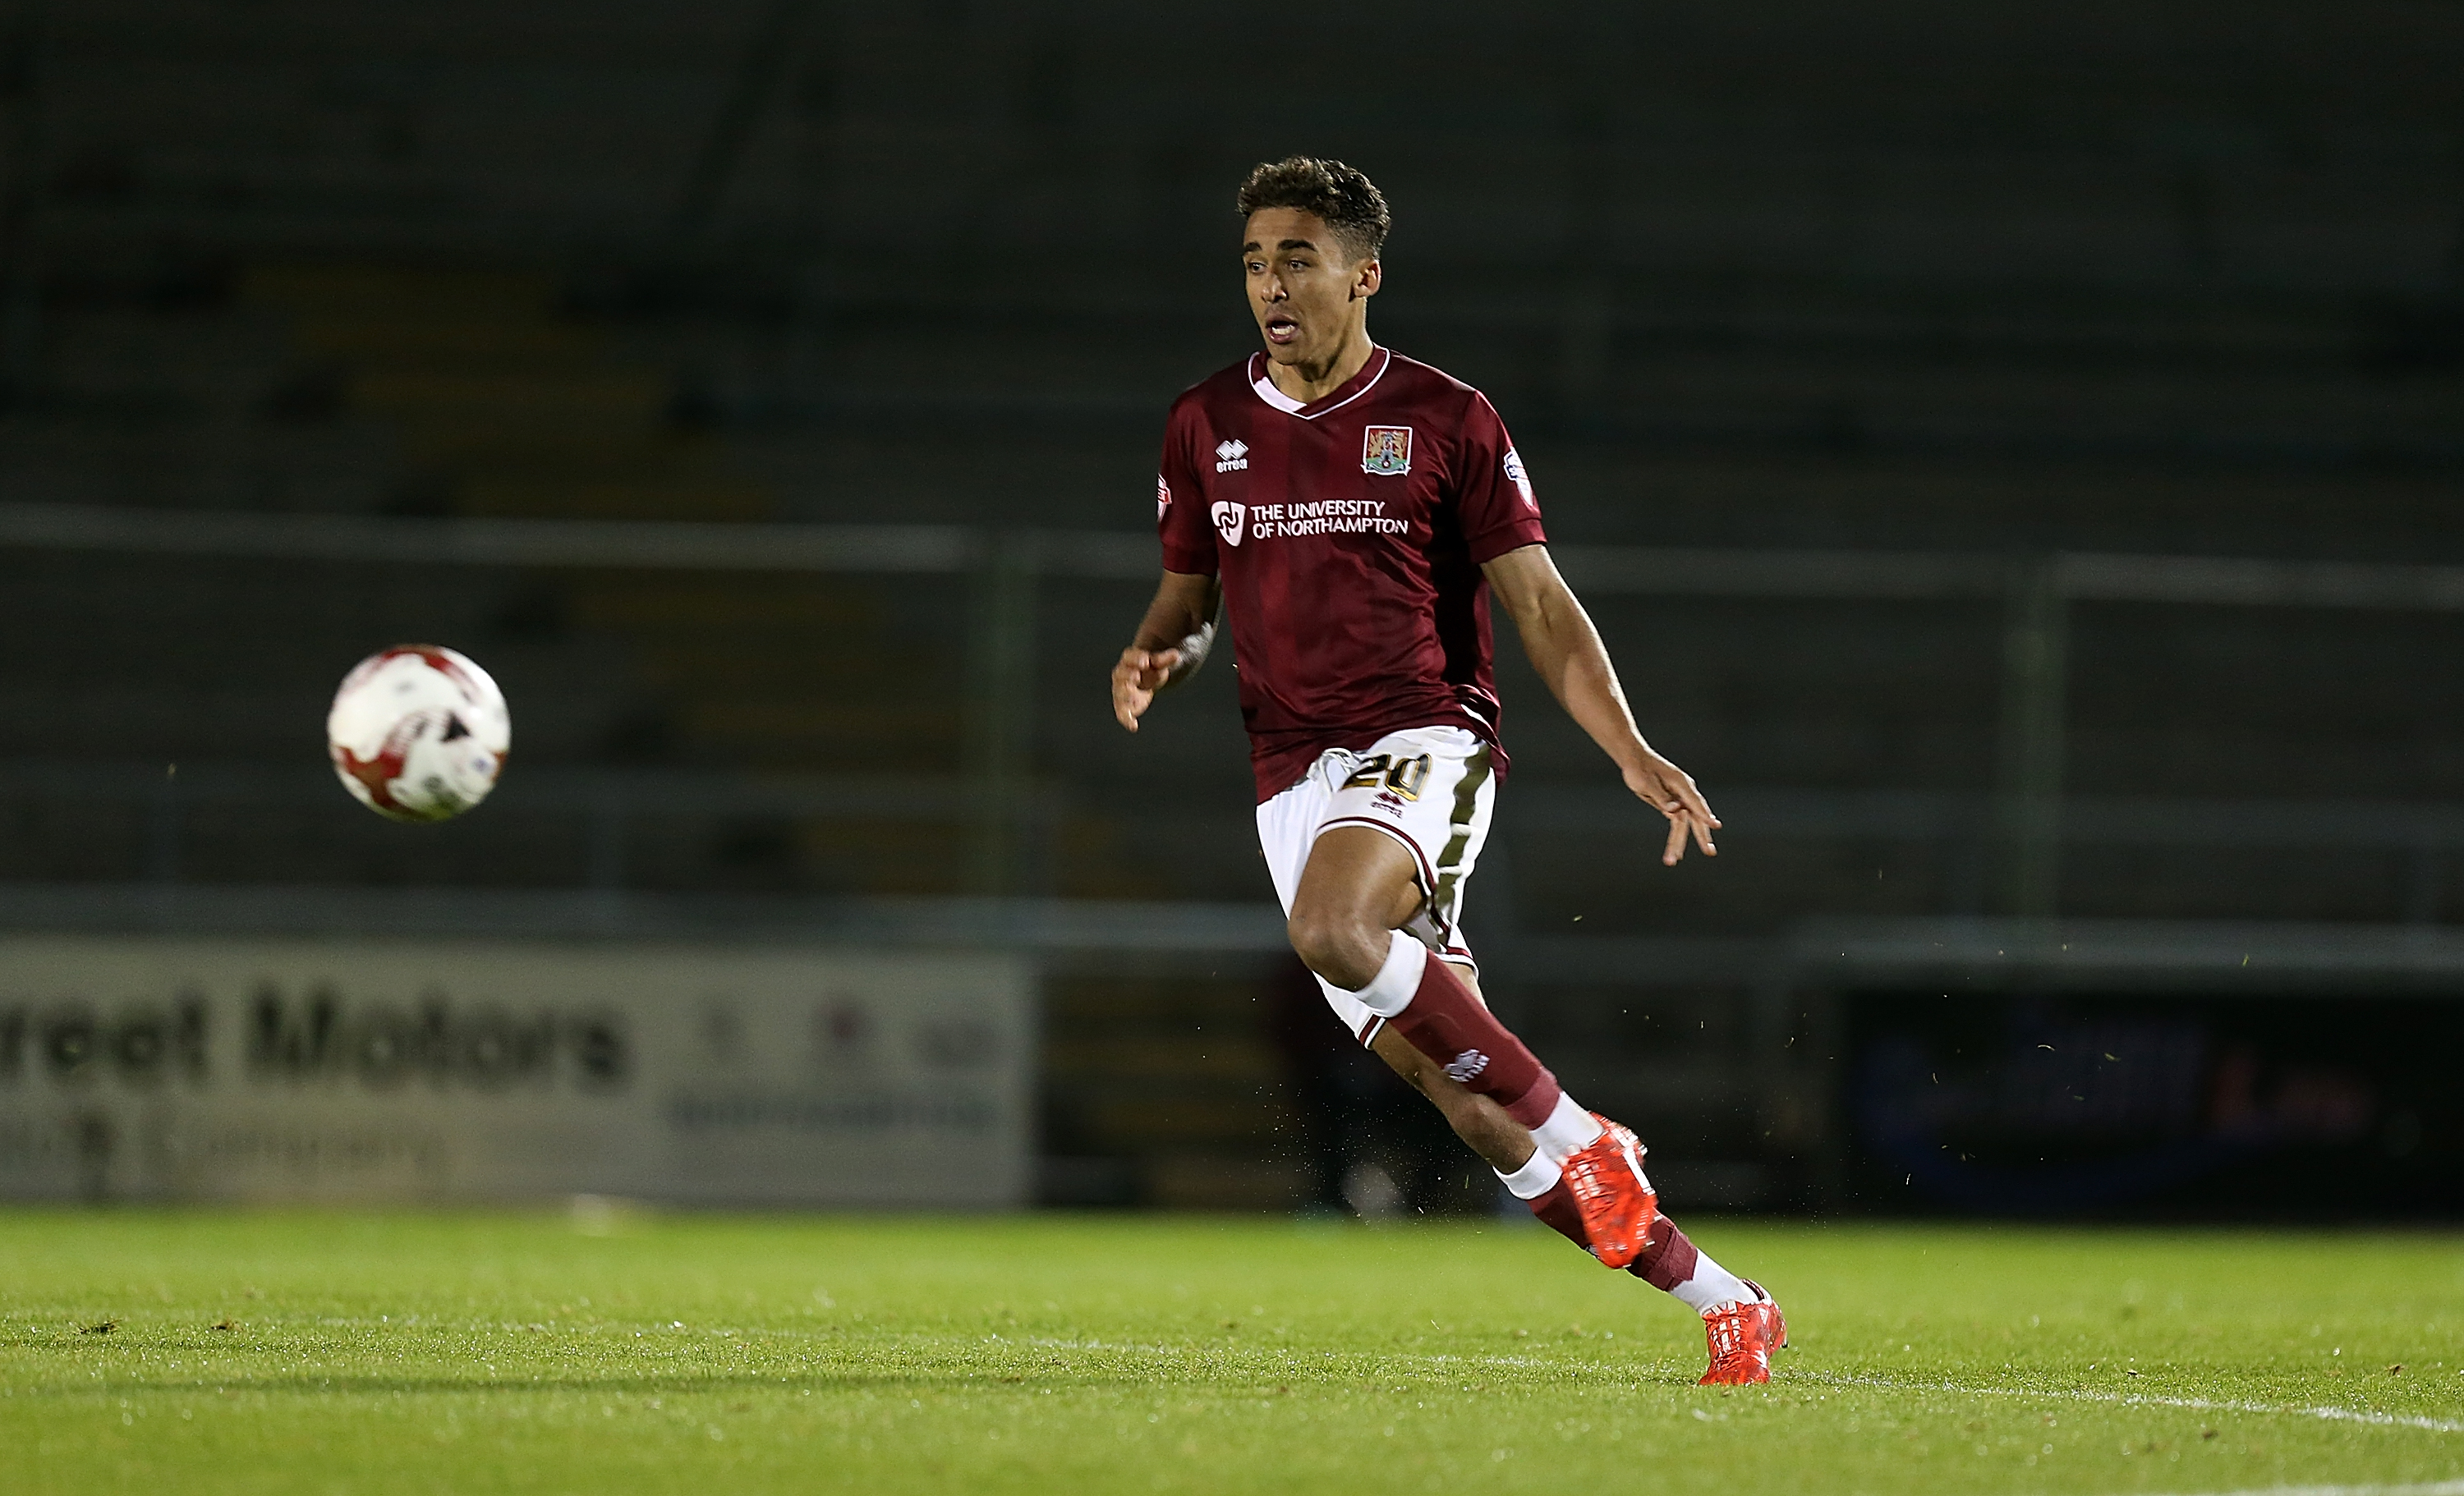 Dominic Calvert-Lewin impressed during his loan stint at League Two side Northampton and could be in line for a move to the highest tier of English football with Manchester United and Everton interested in the player. (Picture Courtesy - AFP/Getty Images)